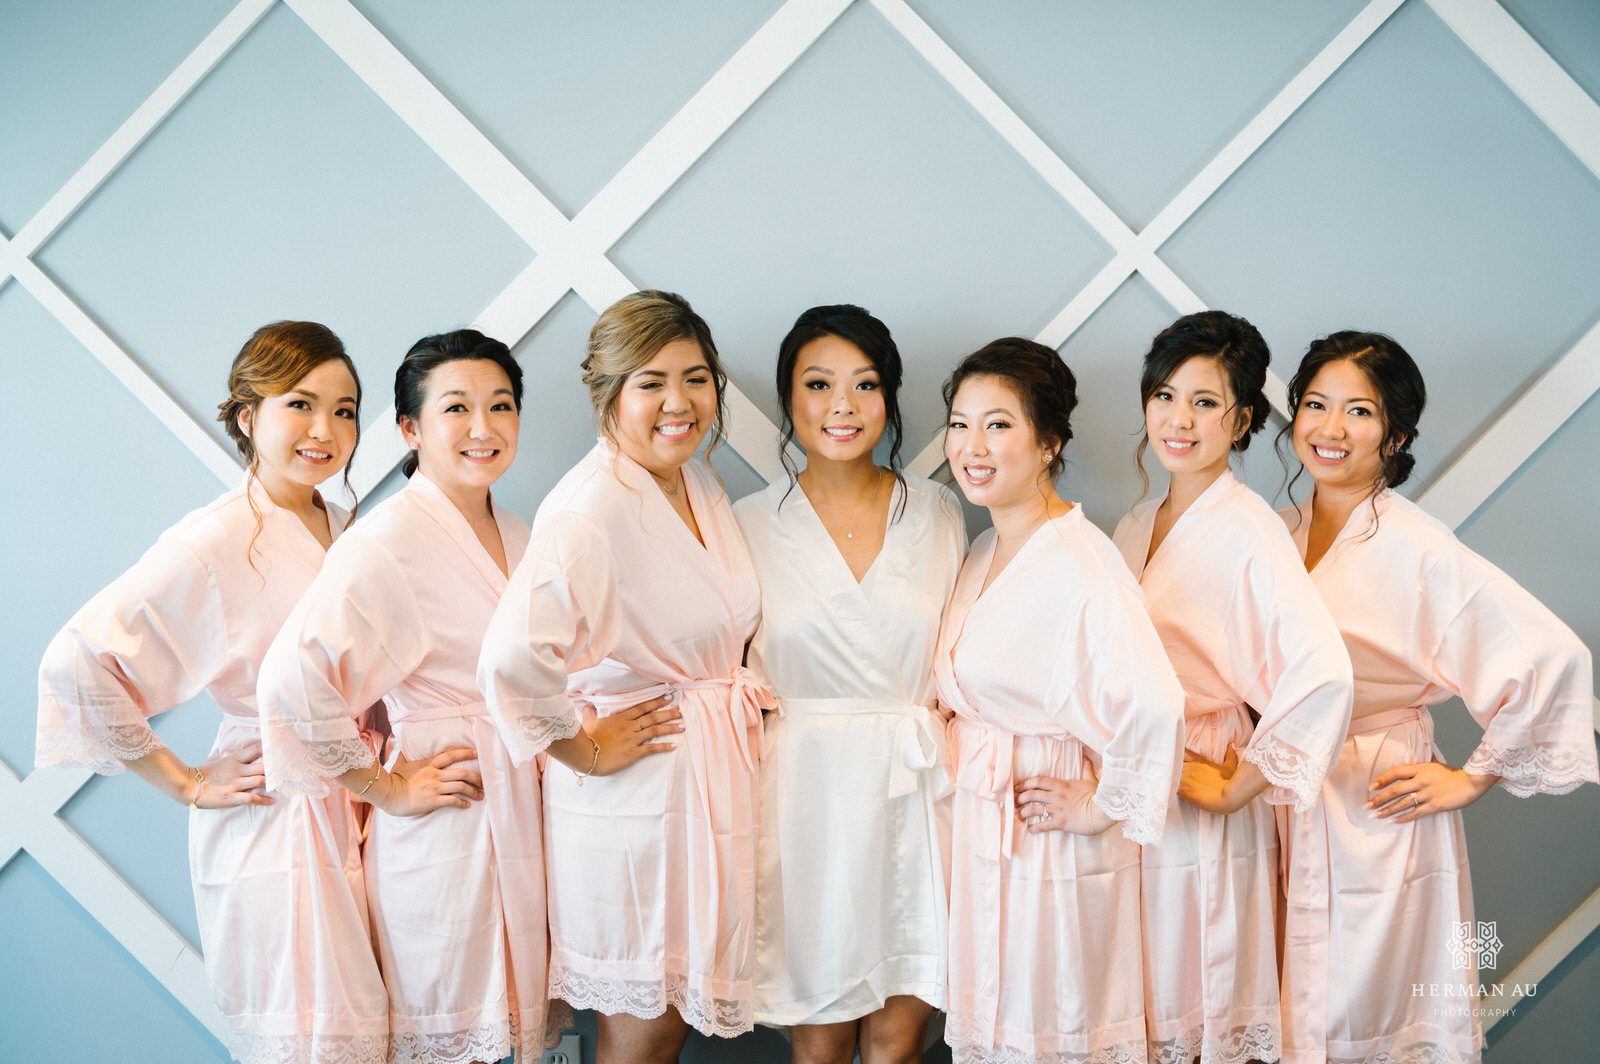 Bride standing in between three bridesmaids on one side and three on the other all wearing robes